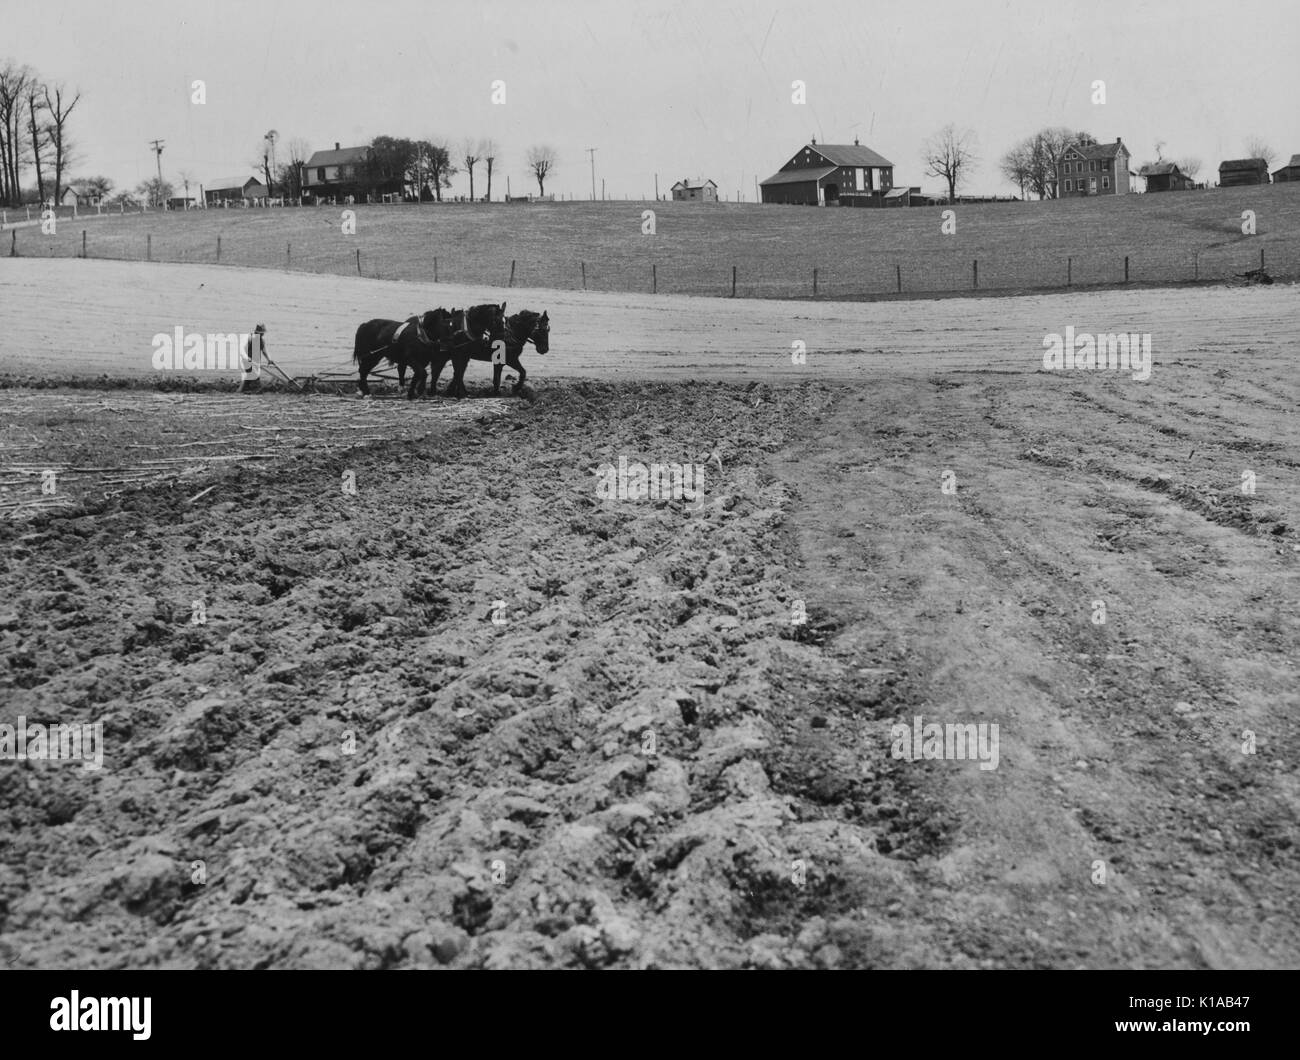 A farmer using a team of horses to turn the soil at his farm, situated in a rural community with houses visible in the background, Maryland, 1936. From the New York Public Library. Stock Photo